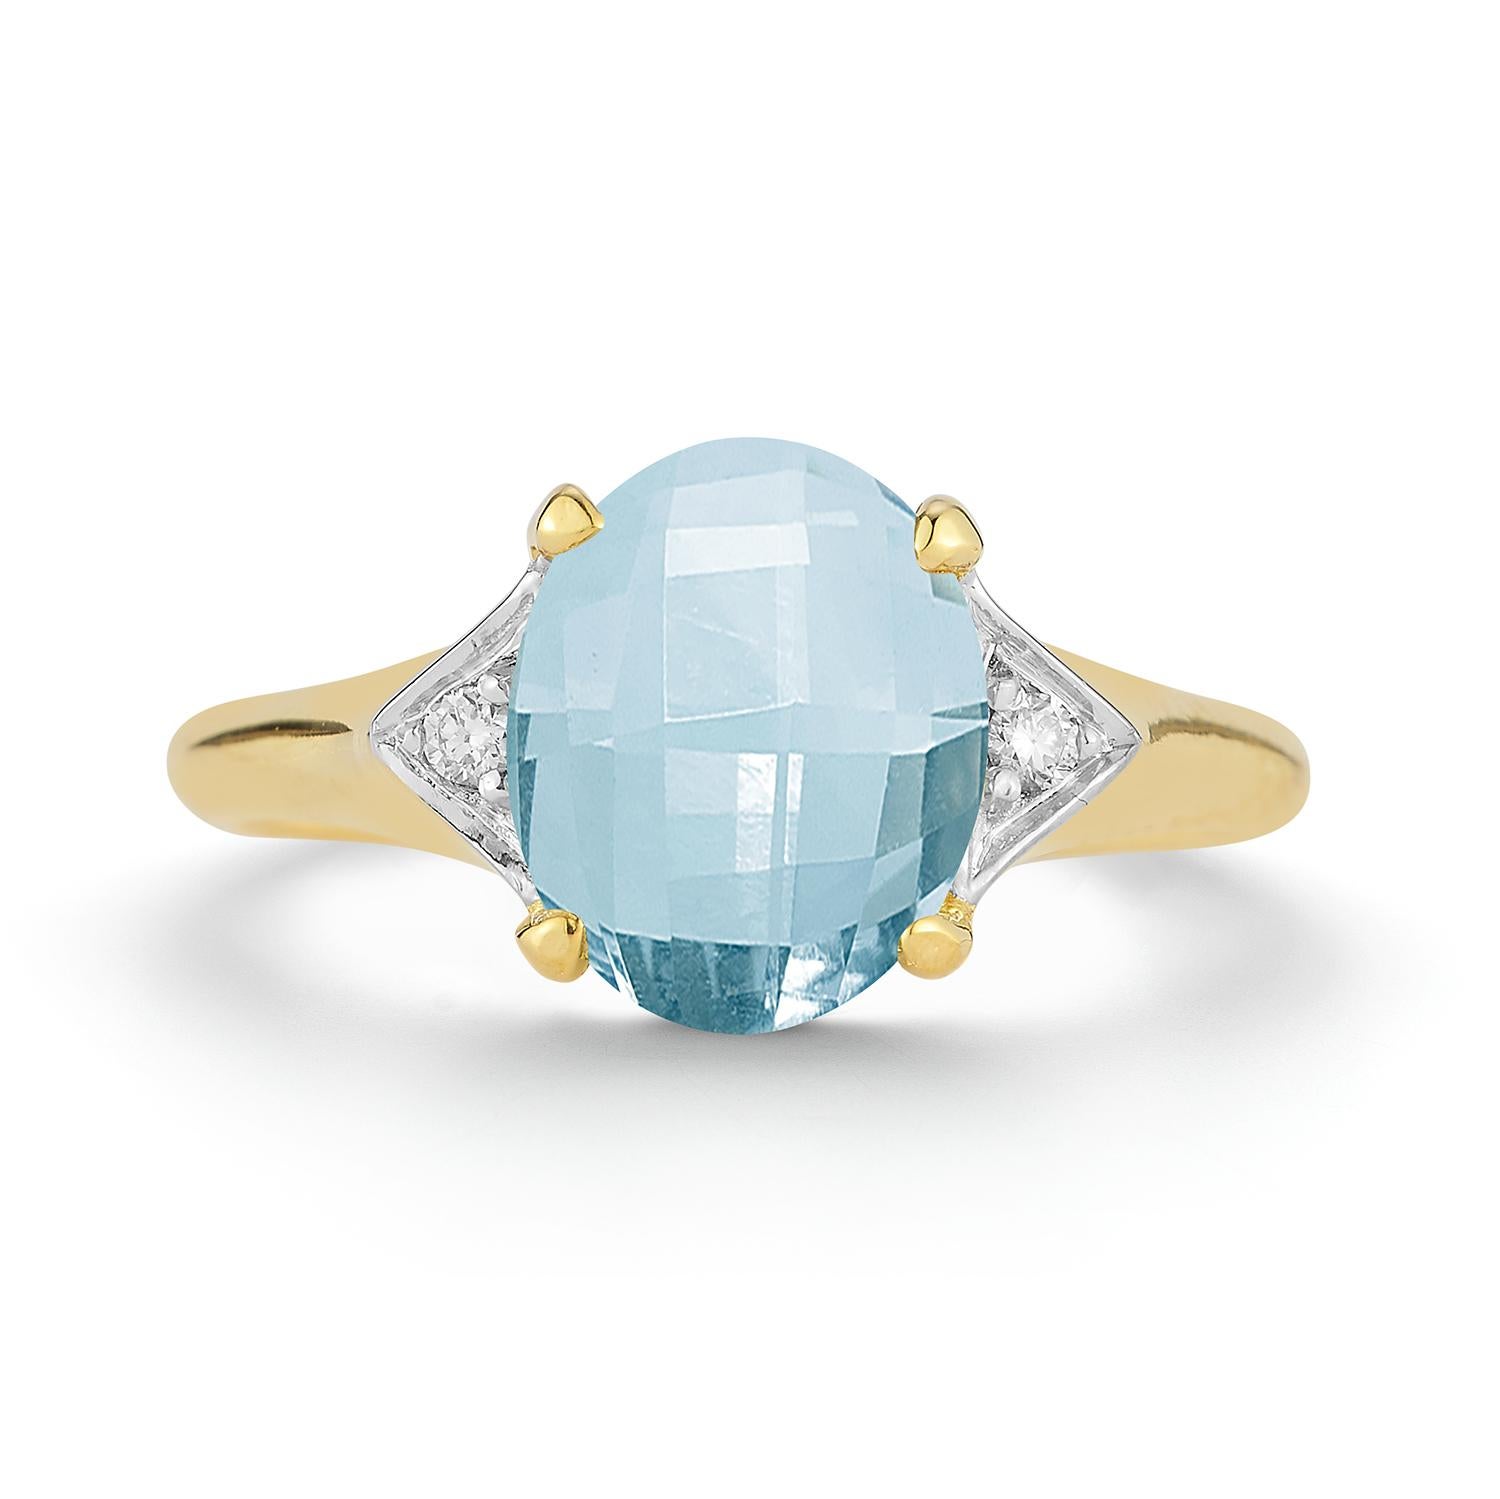 For Sale:  Hand-Crafted 14K Gold 0.05 ct. tw. Diamond & 6.8CT Blue Topaz Cocktail Ring 2